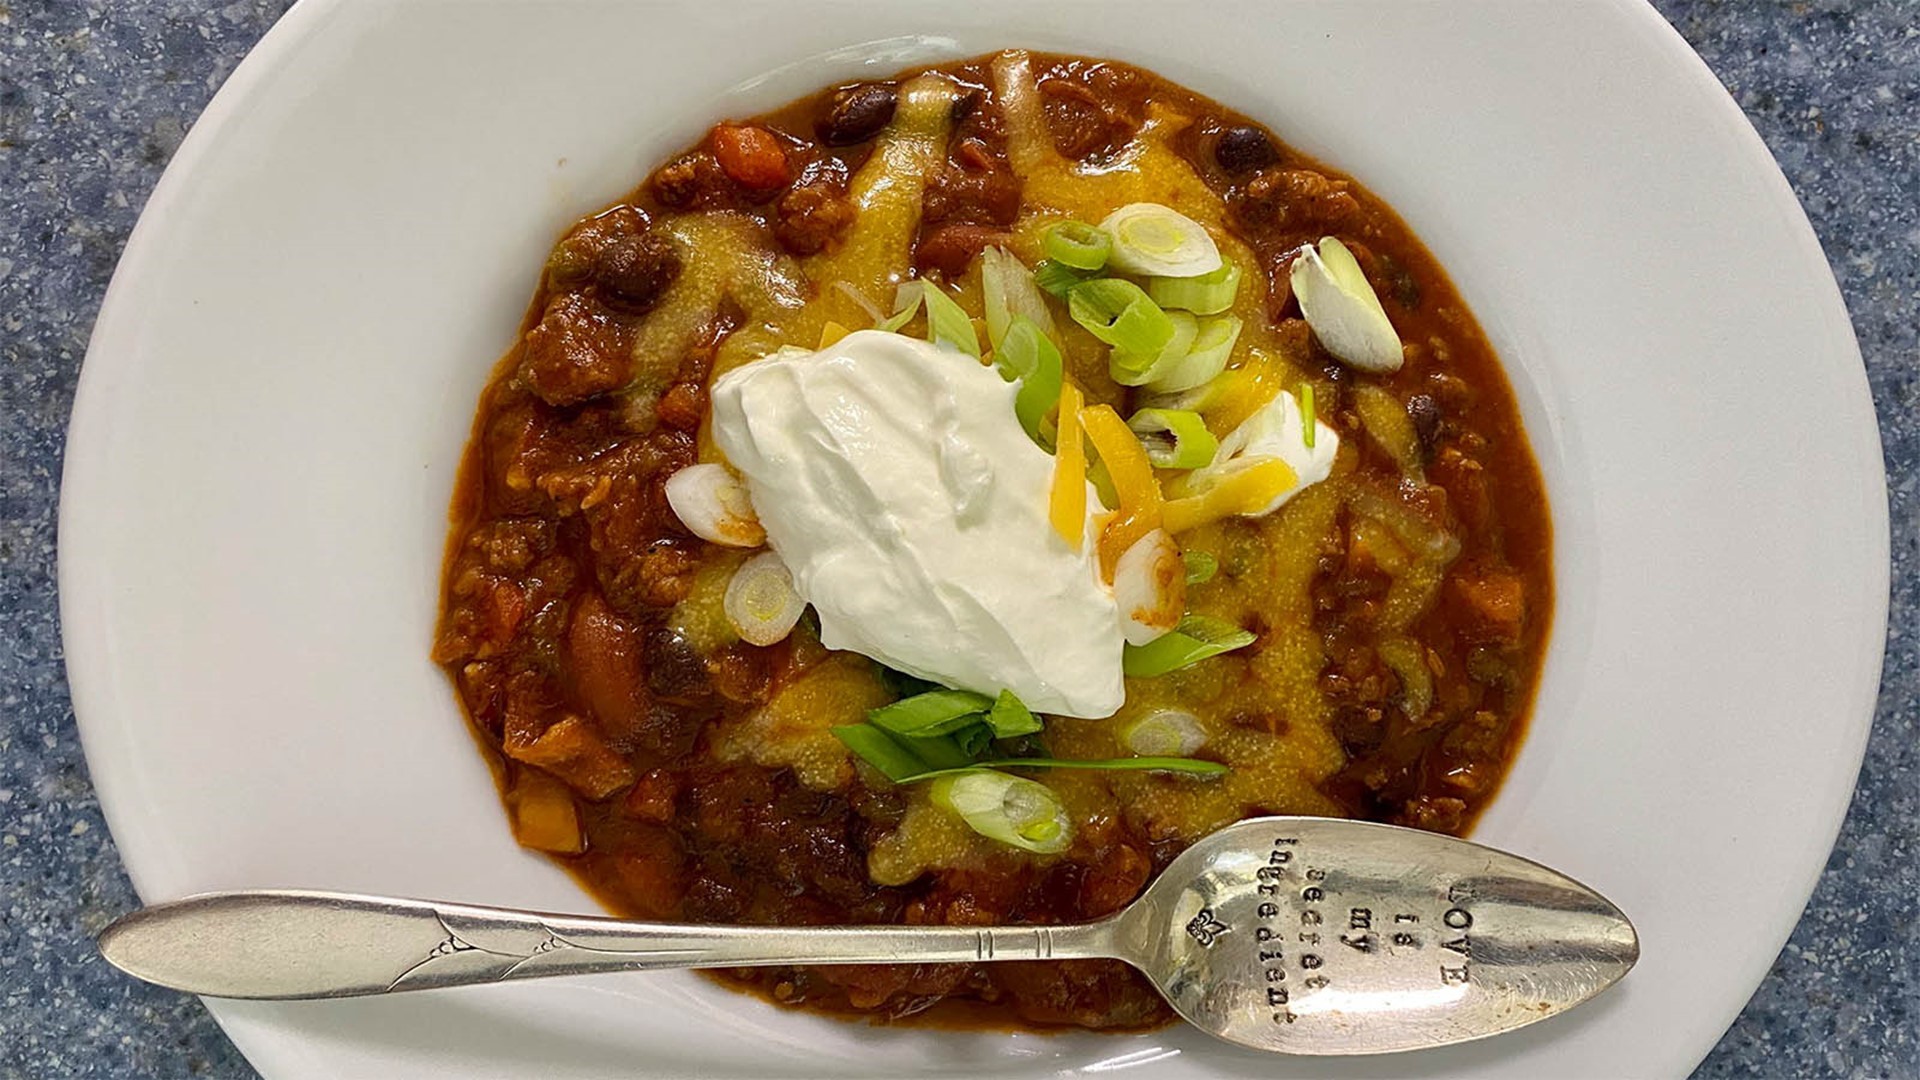 Some of Chef Kevin Belton's finest chili recipes!